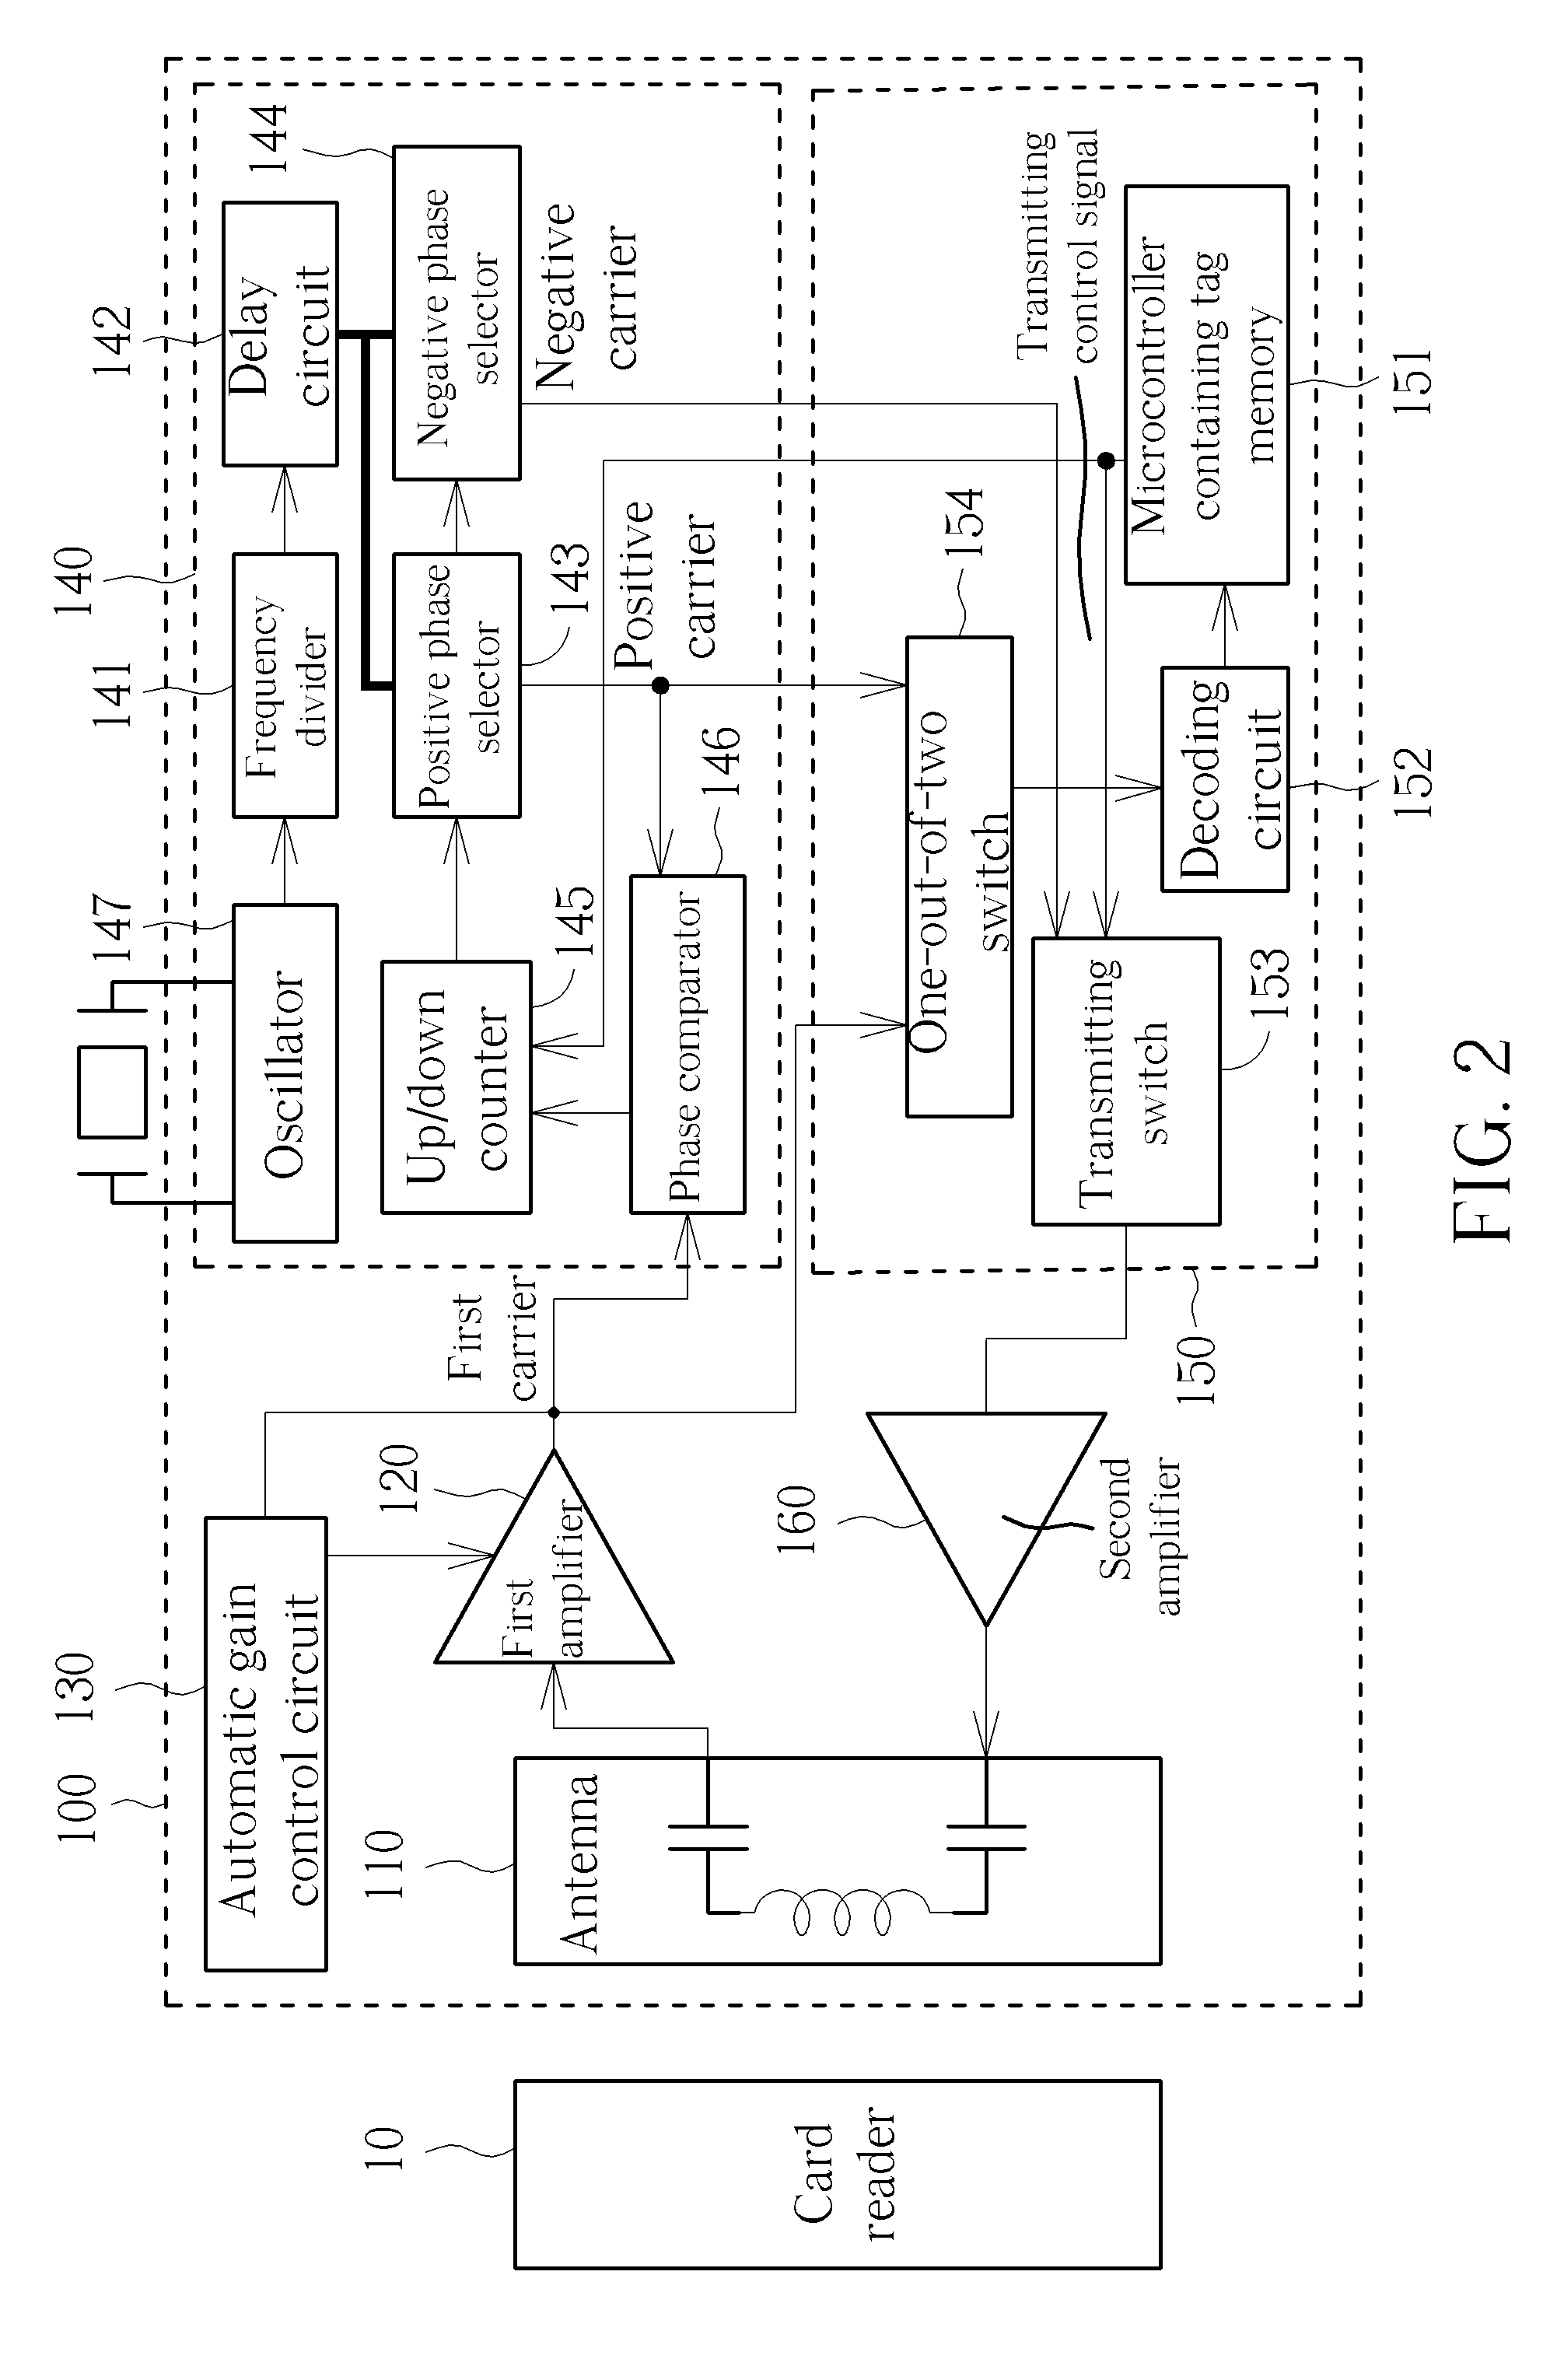 Active electronic tag apparatus for memory card